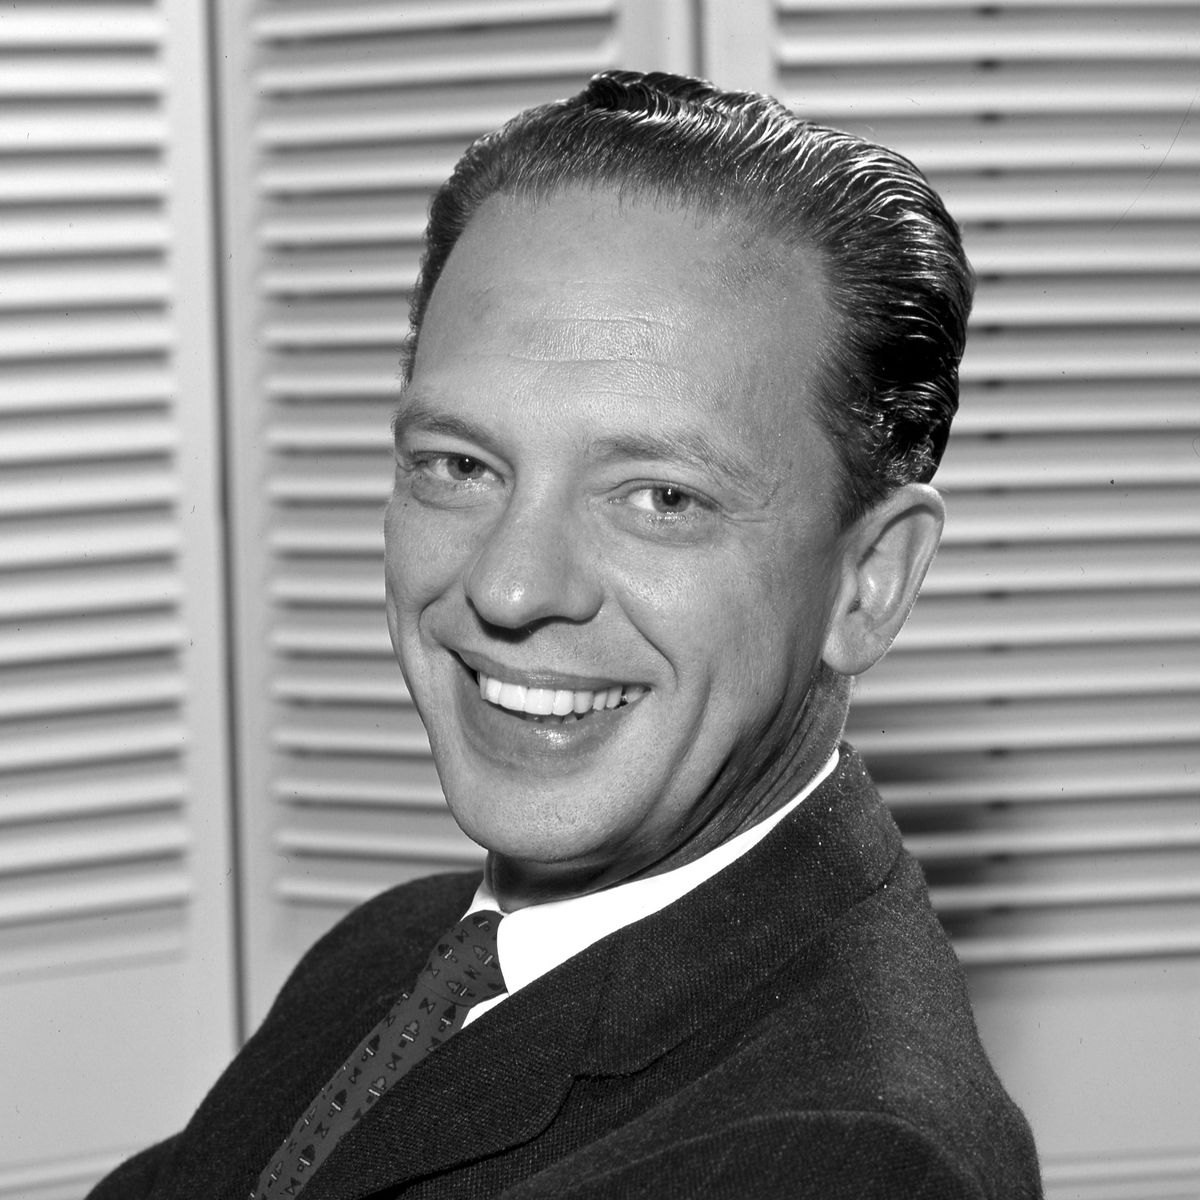 American Actor Don Knotts, 1965 American actor Don Knotts (1924 - 2006), 1965. (Photo by CBS Photo Archive/Getty Images)